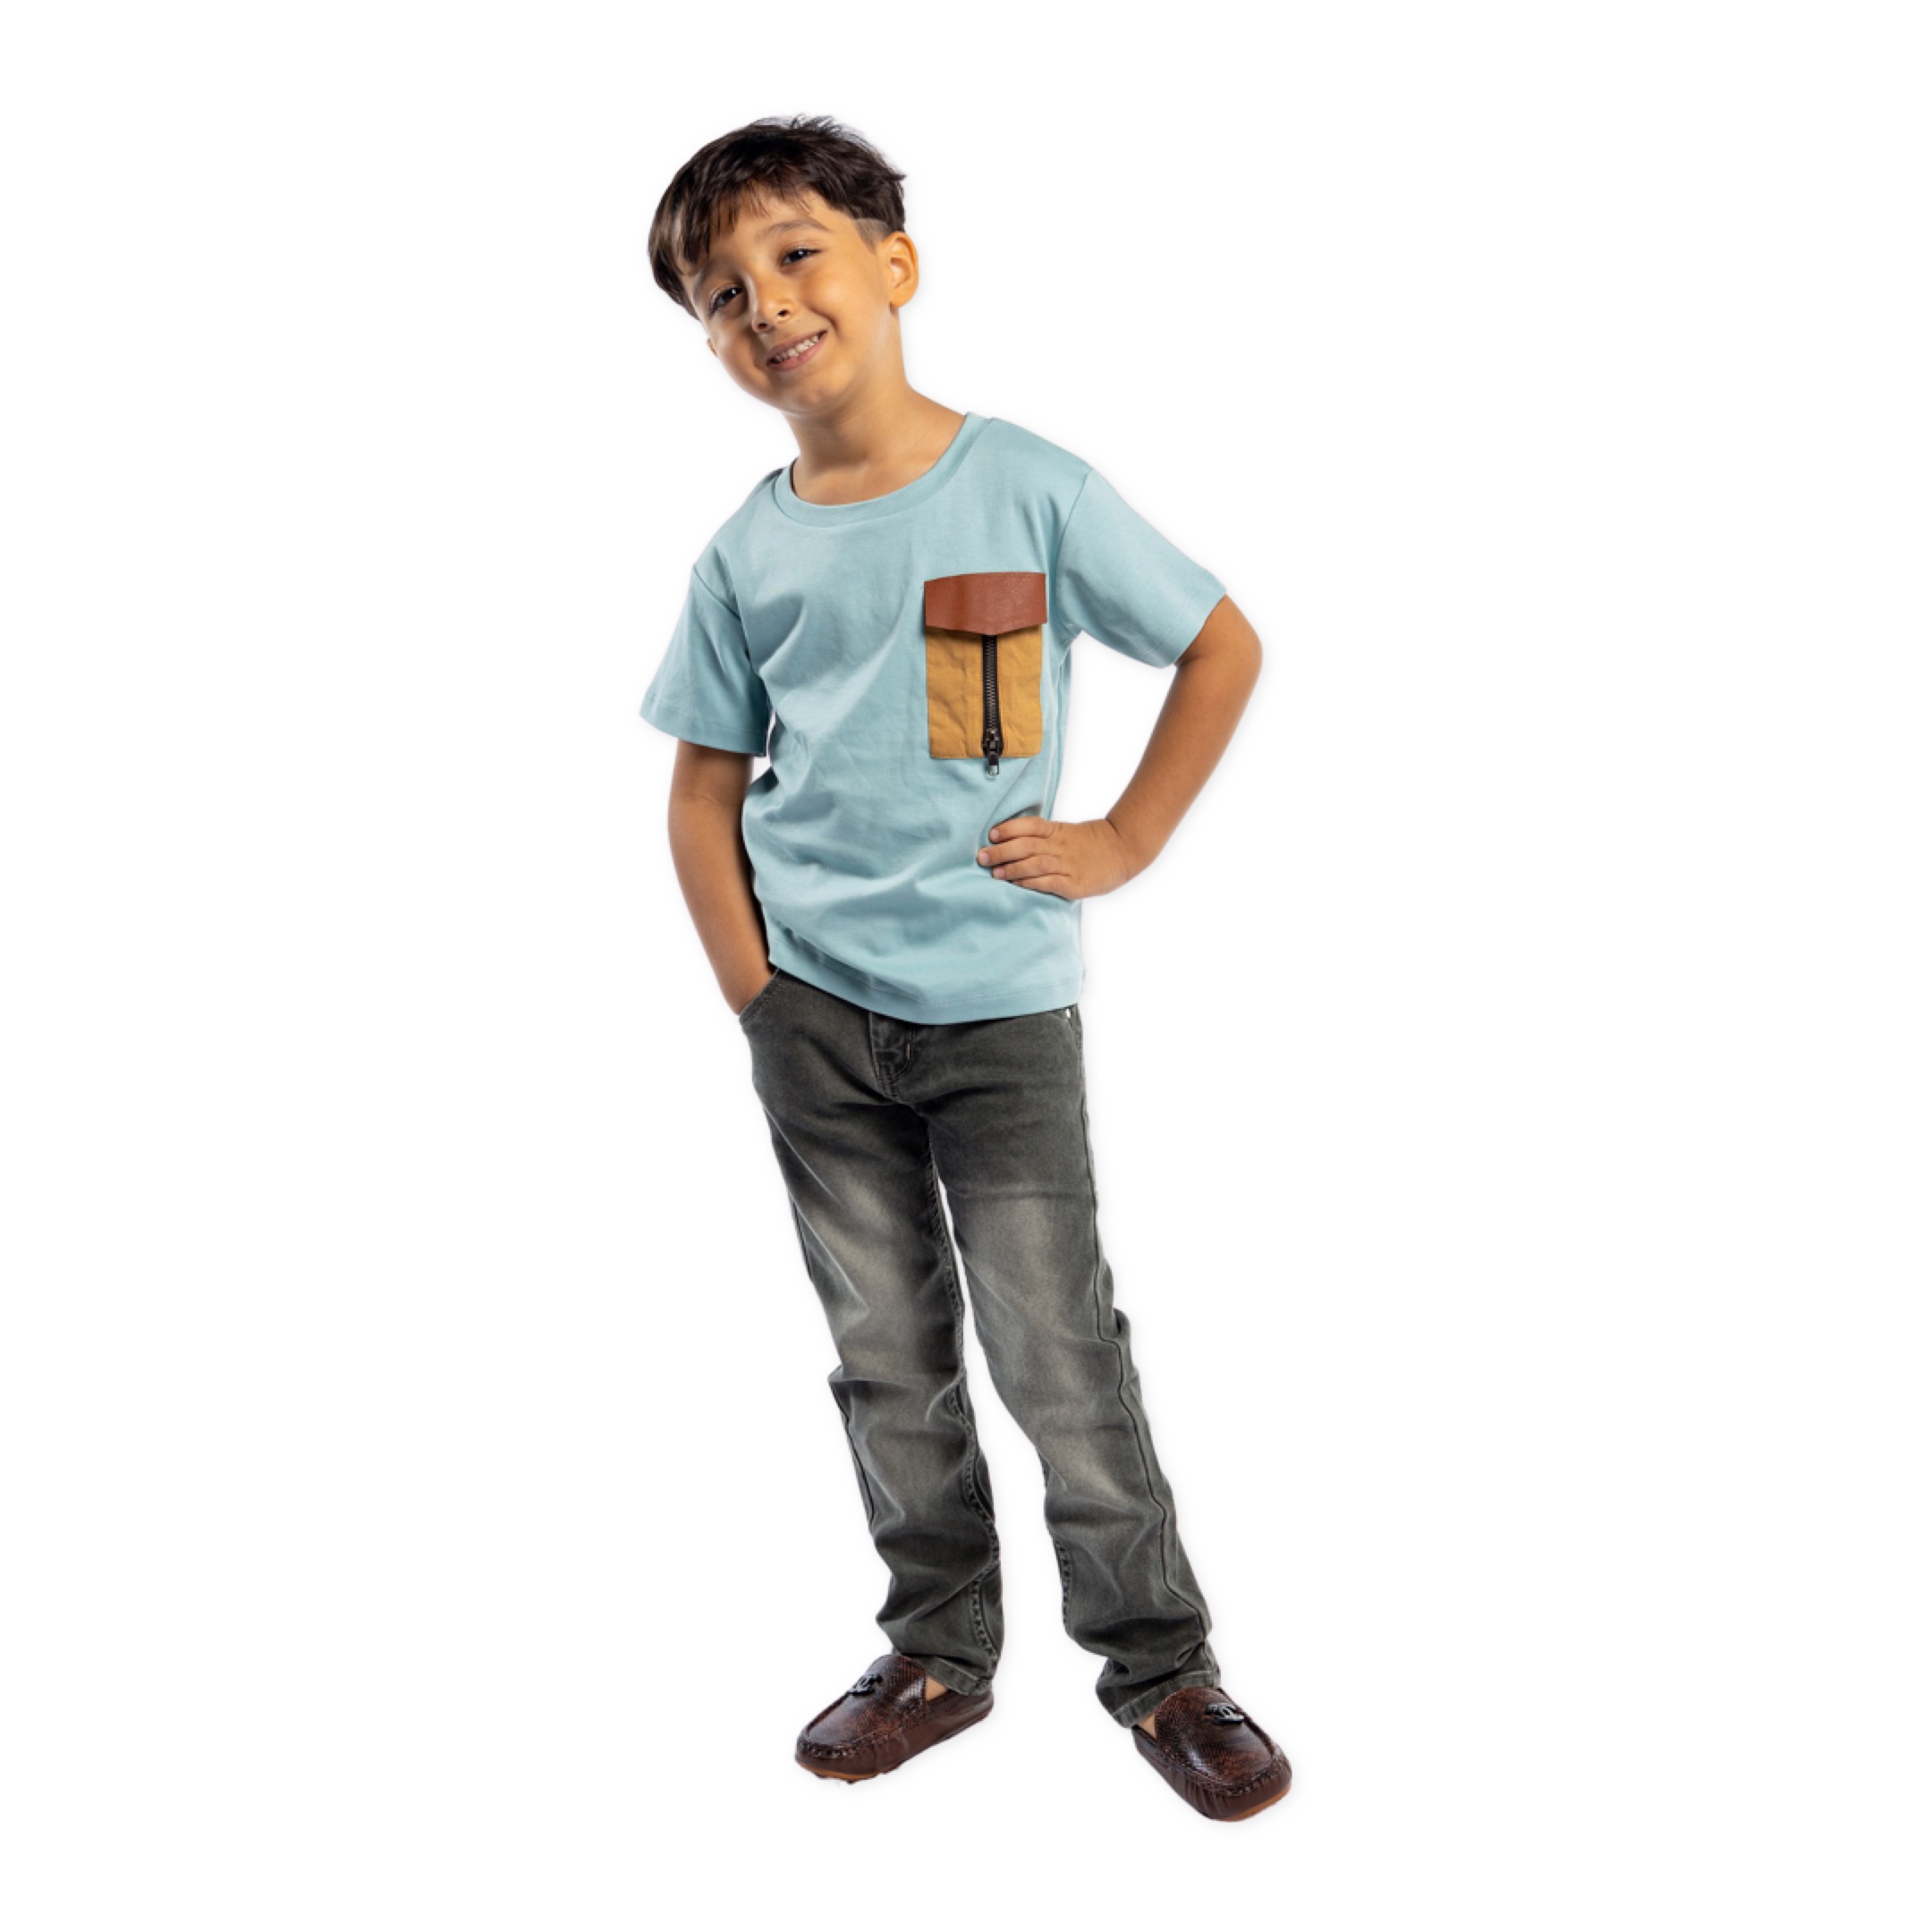 Zoul & Zera cute & comfortable round neck with Zipper Pocket casual t-shirt with shoulder snap button for Boys